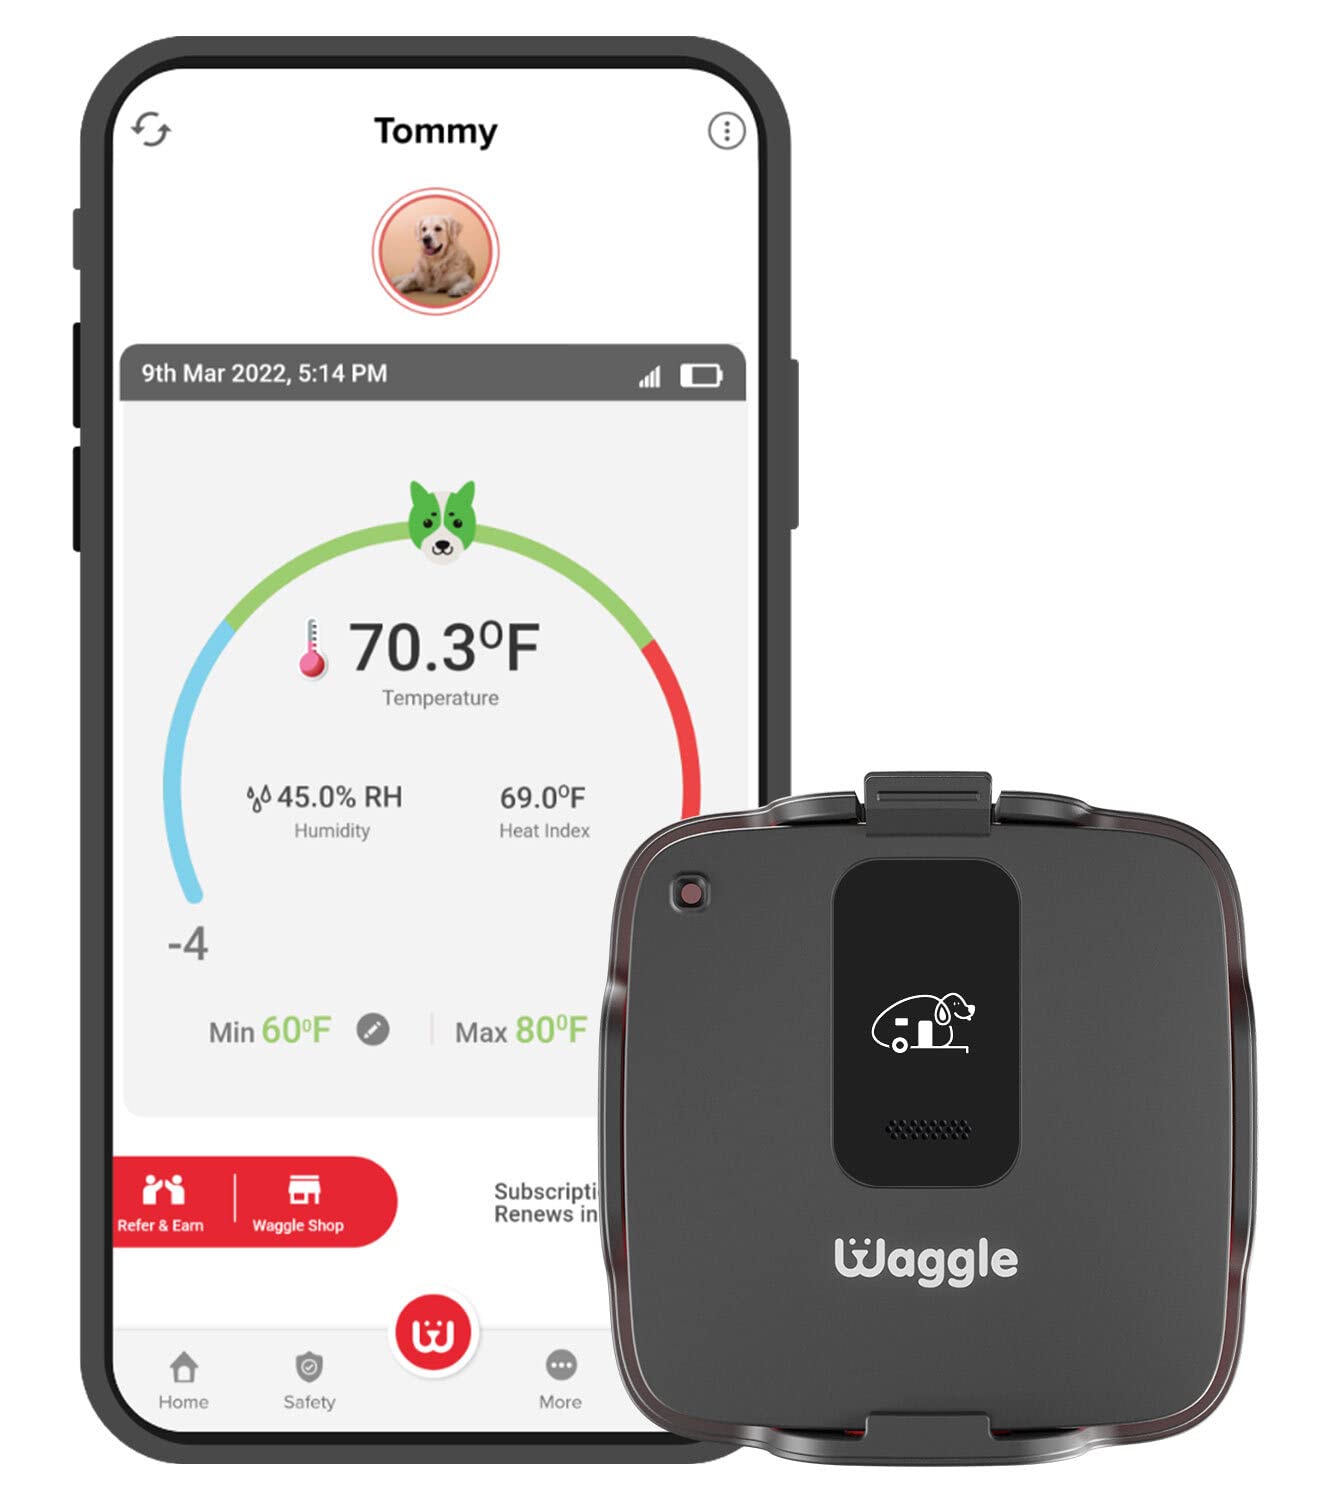 Waggle RV/Dog Safety Temperature & Humidity Sensor | Wireless Pet Monitoring System Verizon Cellular Instant Alerts on Temp/Humidity/Power Loss Via